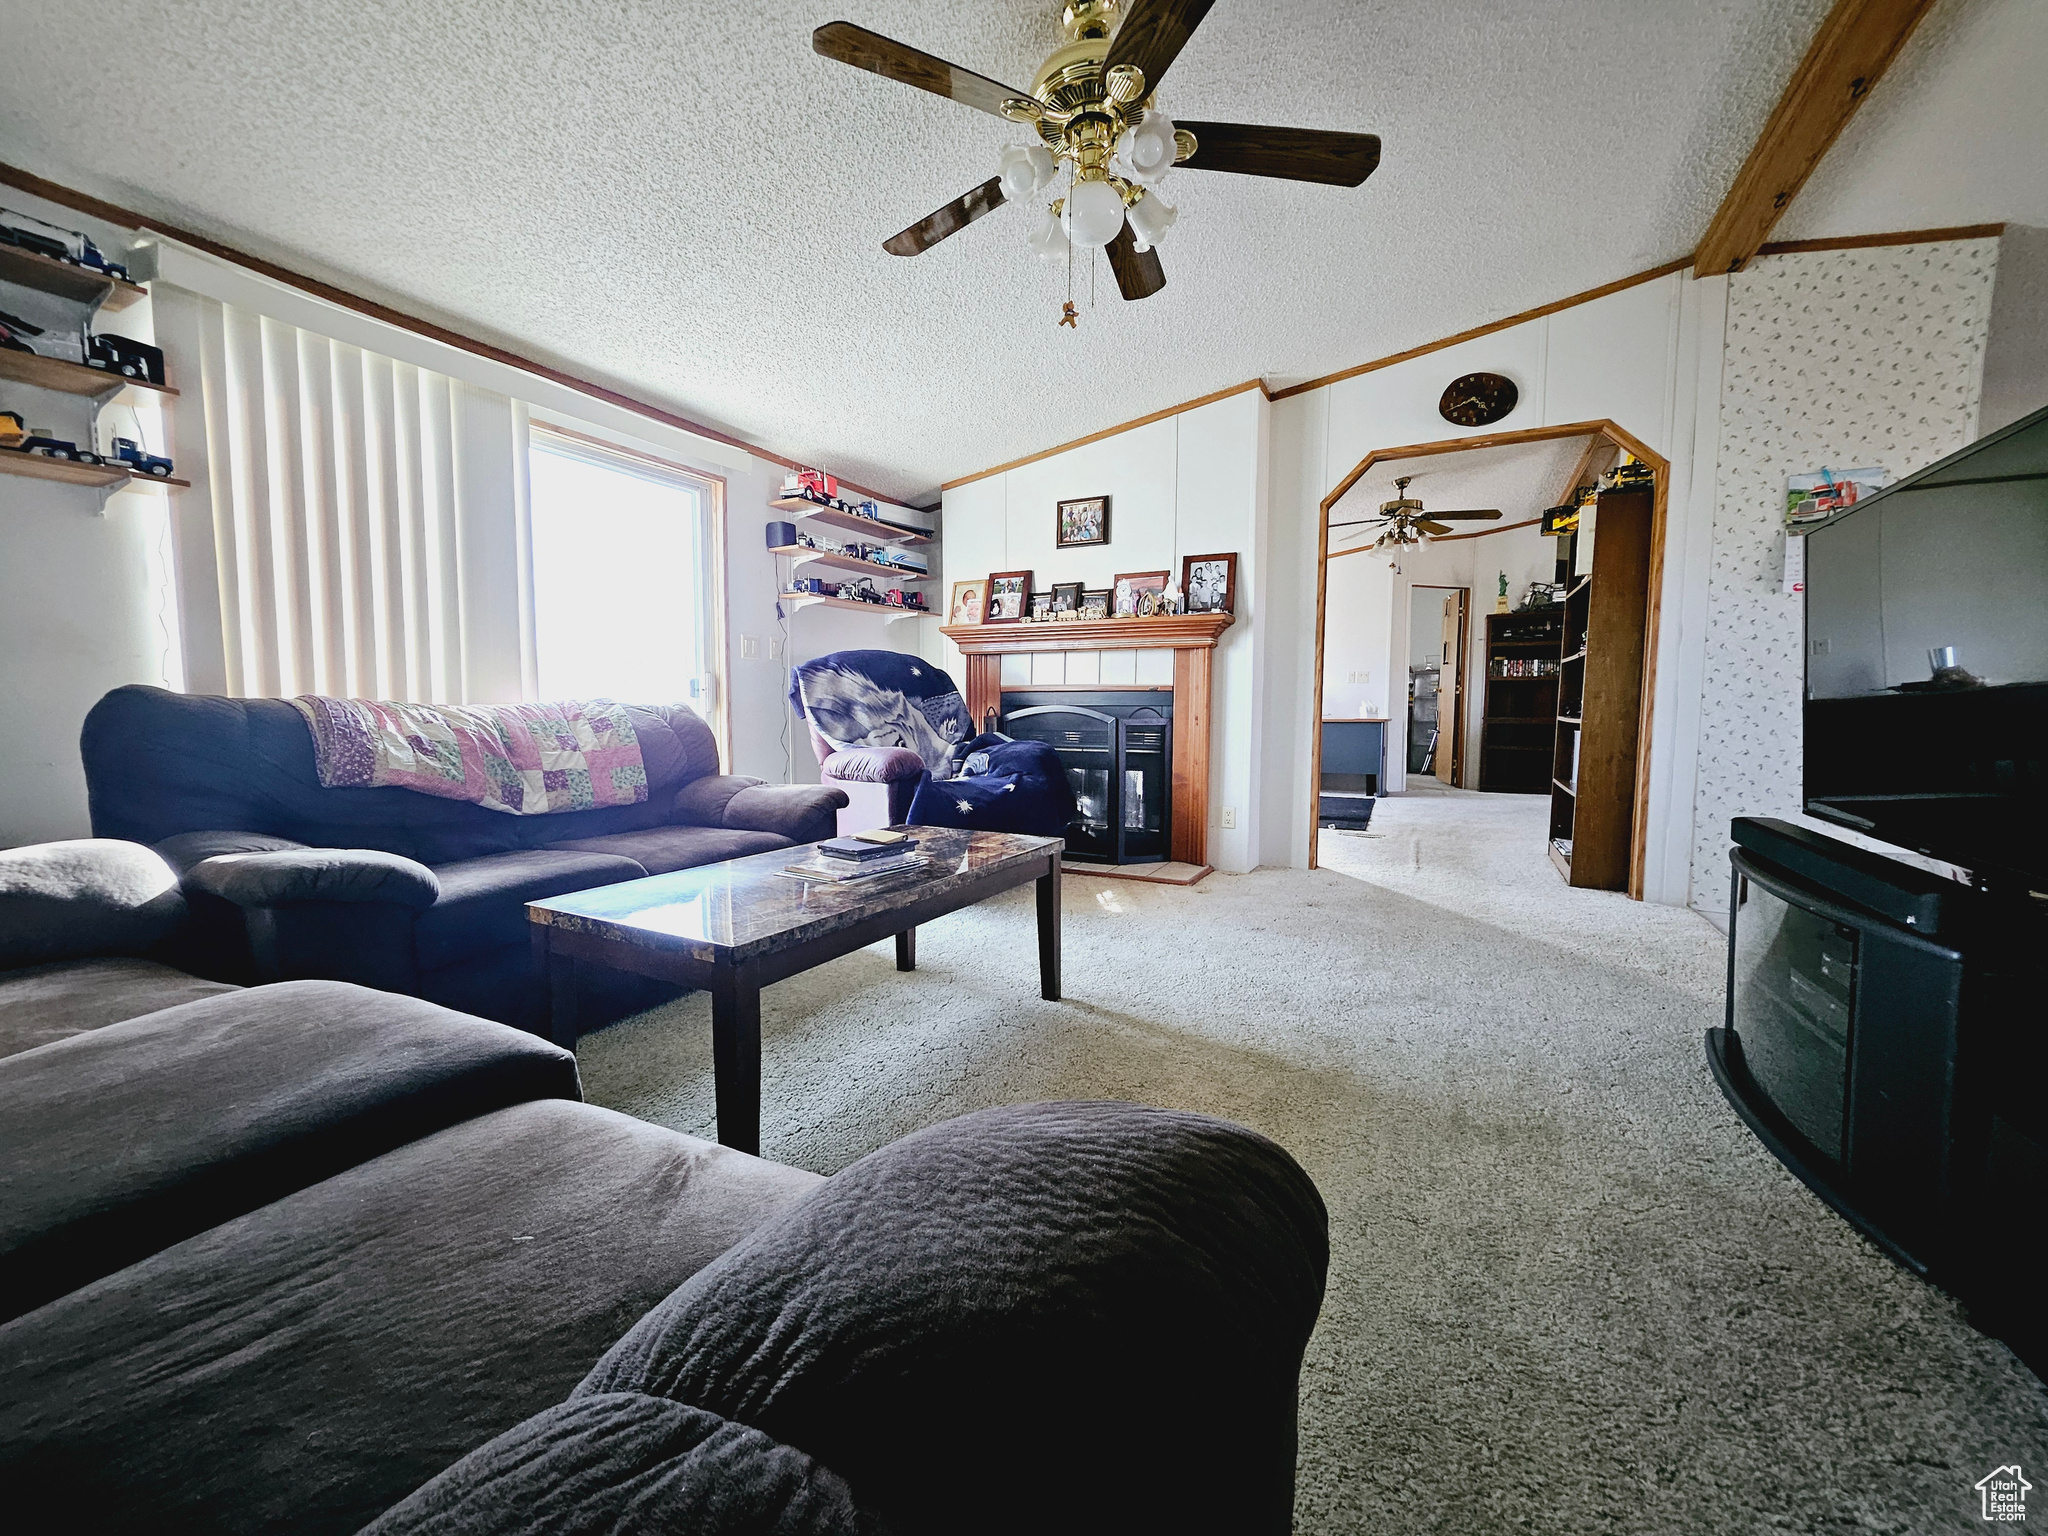 Living room featuring lofted ceiling, light colored carpet, ceiling fan, a textured ceiling, and ornamental molding